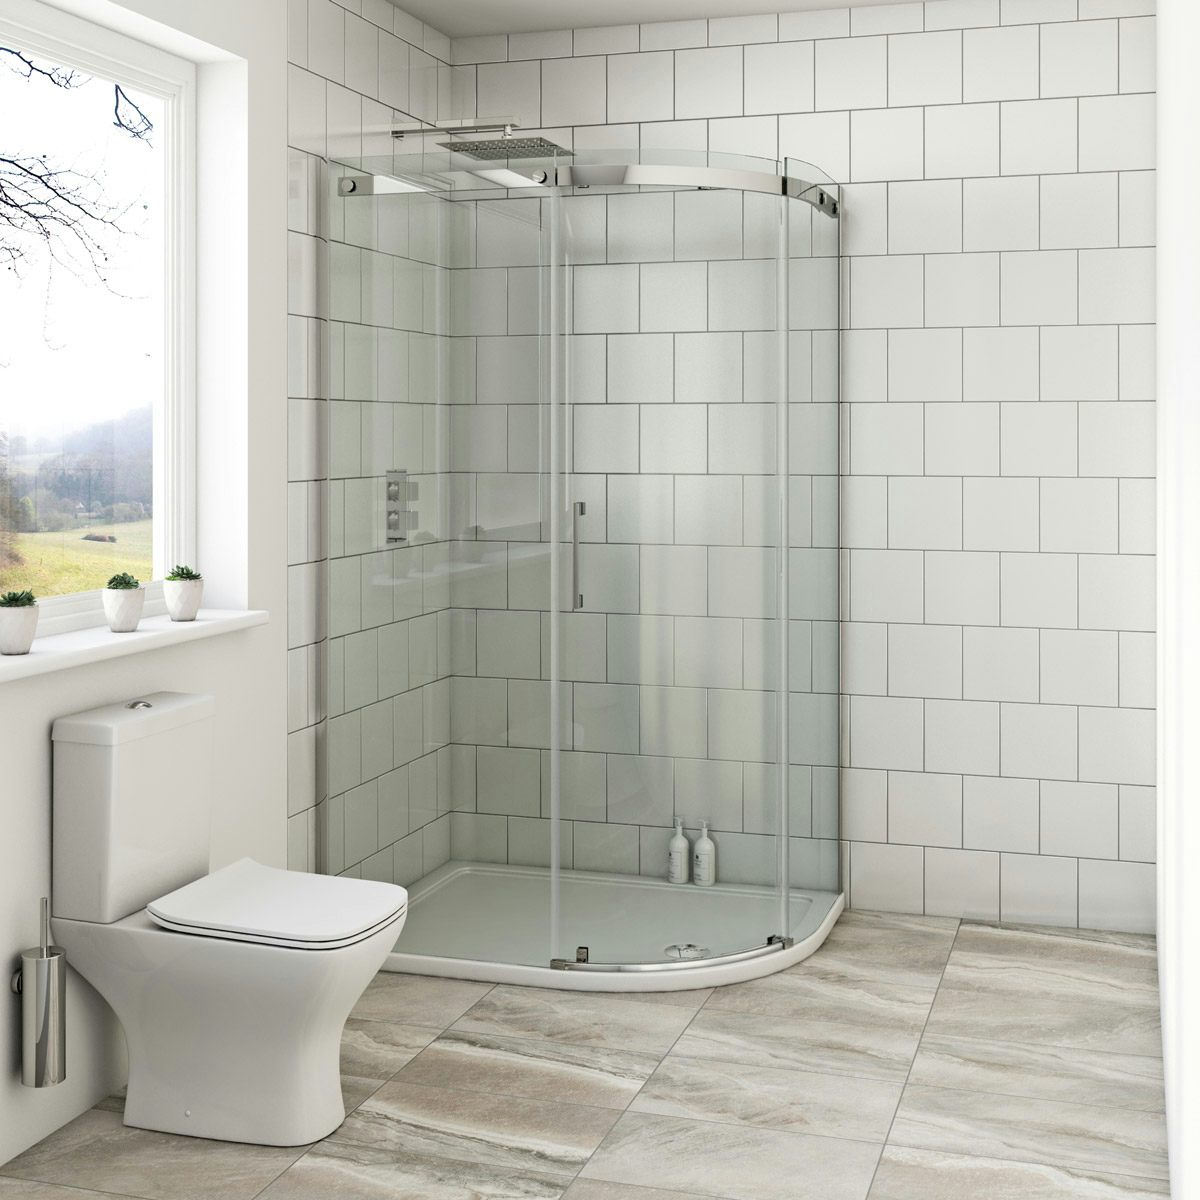 Mode Harrison 8mm right handed offset quadrant shower enclosure with stone tray 1200 x 800